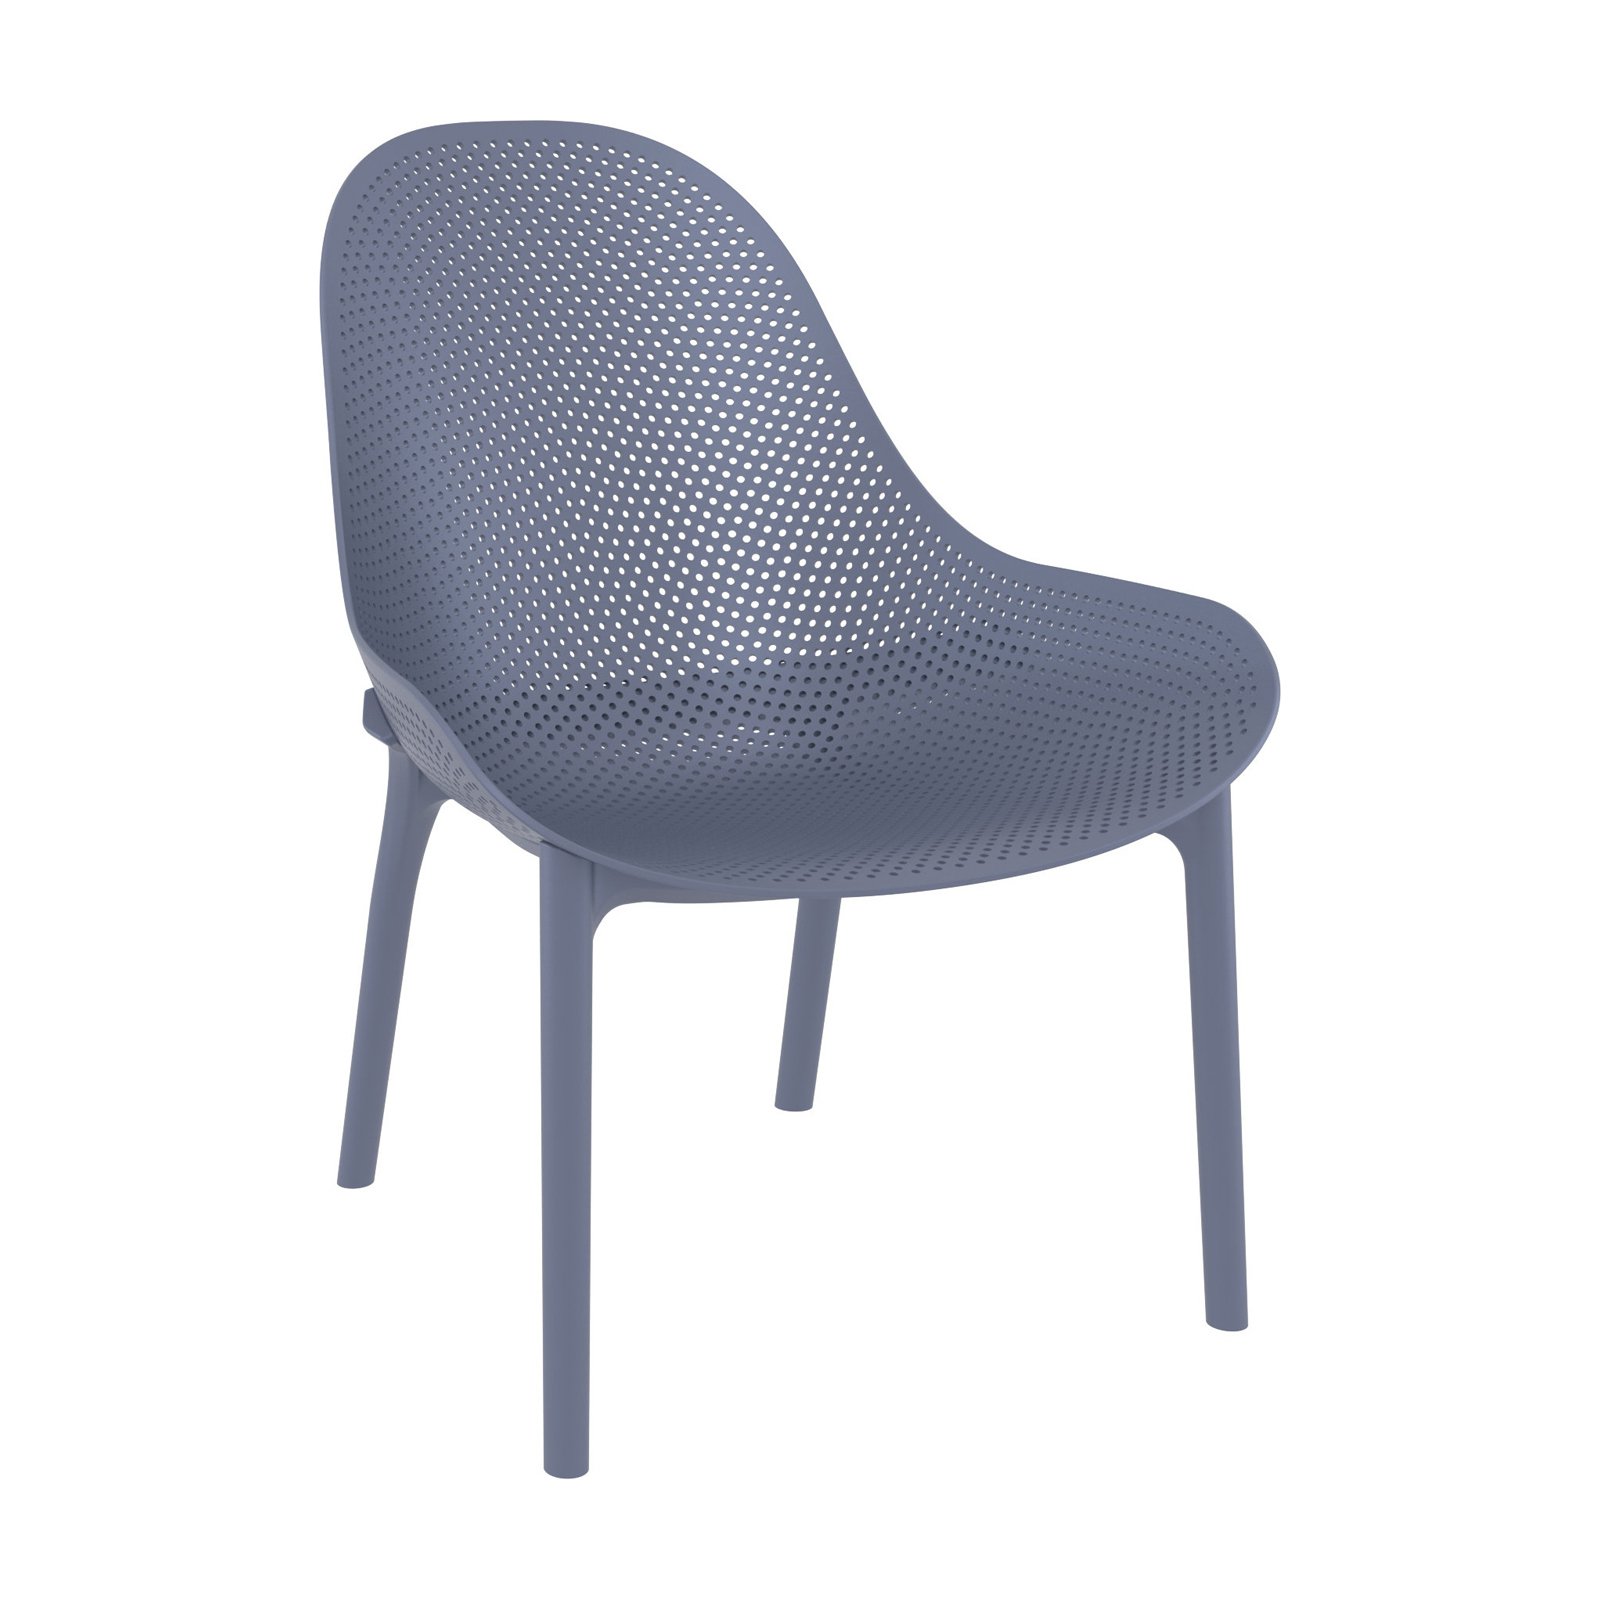 Compamia Sky Patio Chair in Dark Gray - image 1 of 11